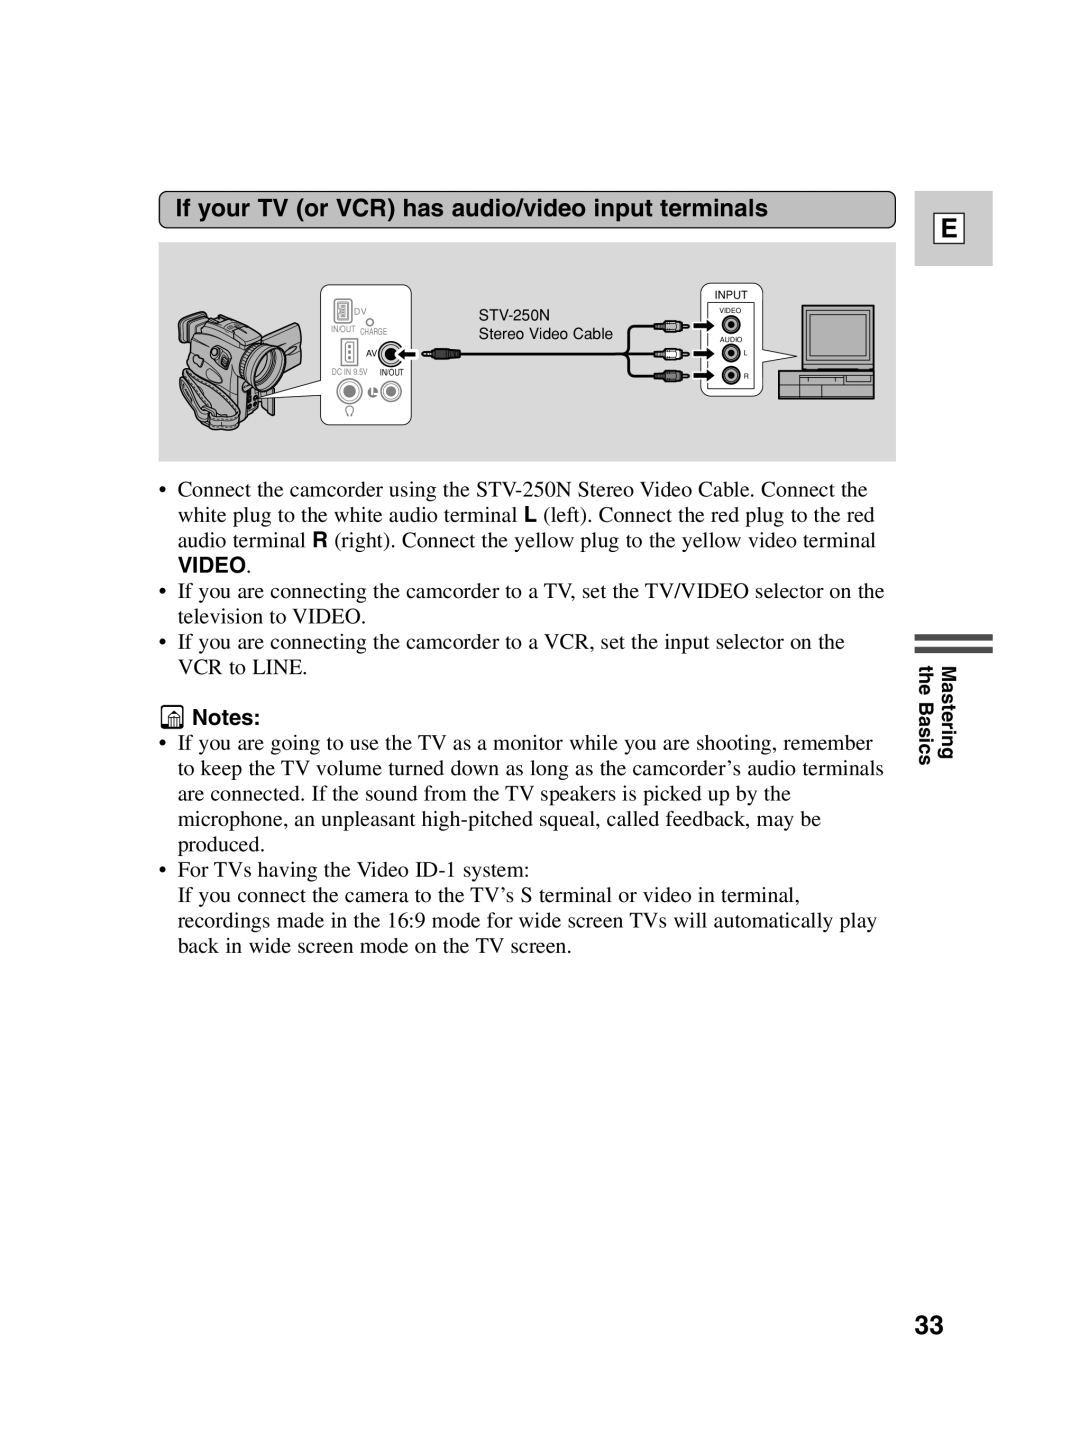 Canon Optura 100 instruction manual If your TV or VCR has audio/video input terminals, Video 